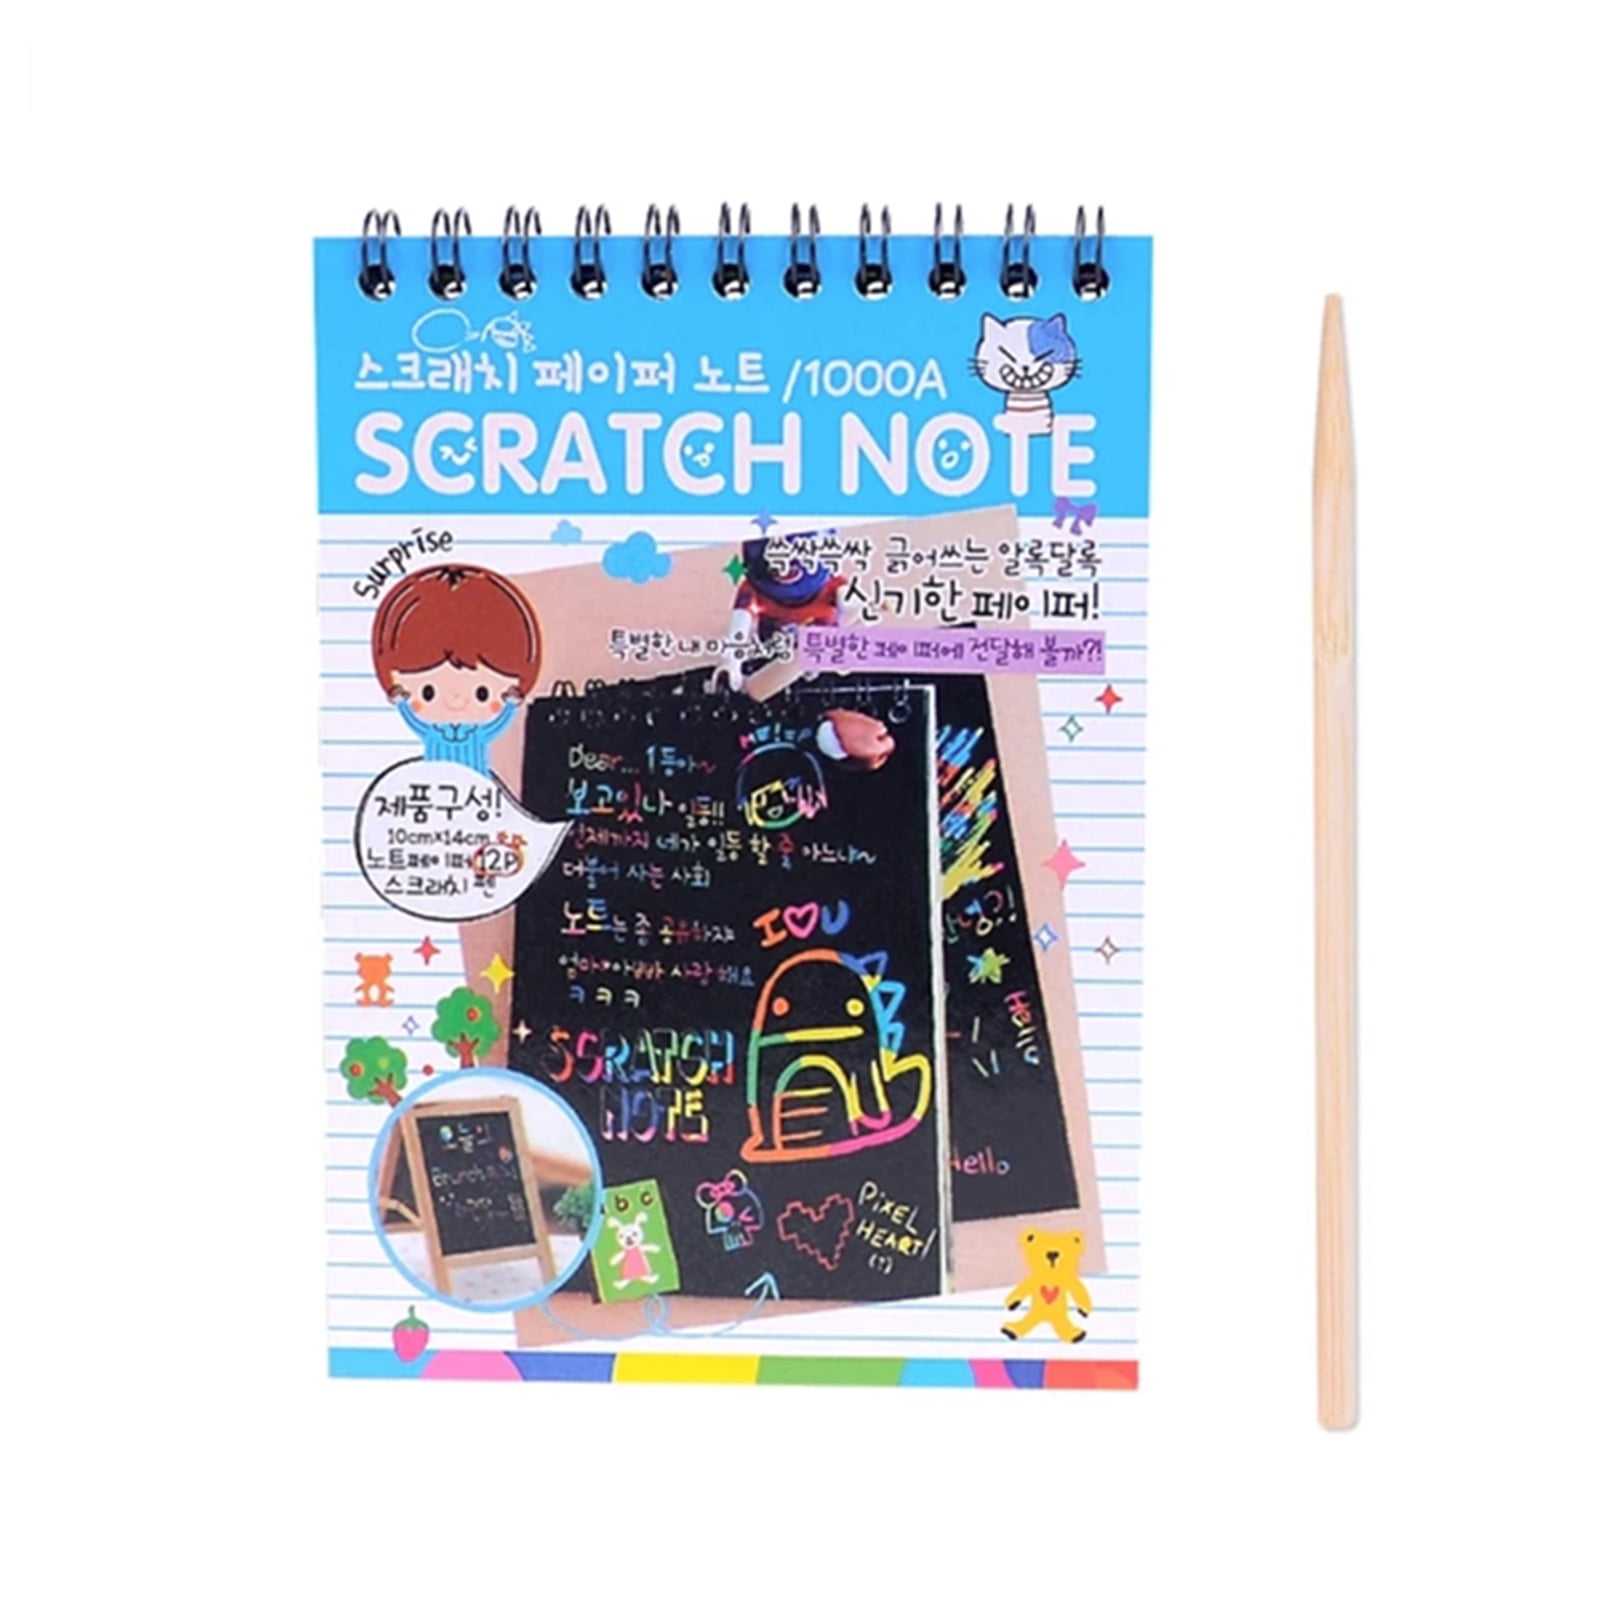  8 Pack Scratch Arts Drawing Notebook Paper for Kids Art  Supplies, Large Rainbow Scratch and Sketch Books Set for Kids Party Favors  : Arts, Crafts & Sewing